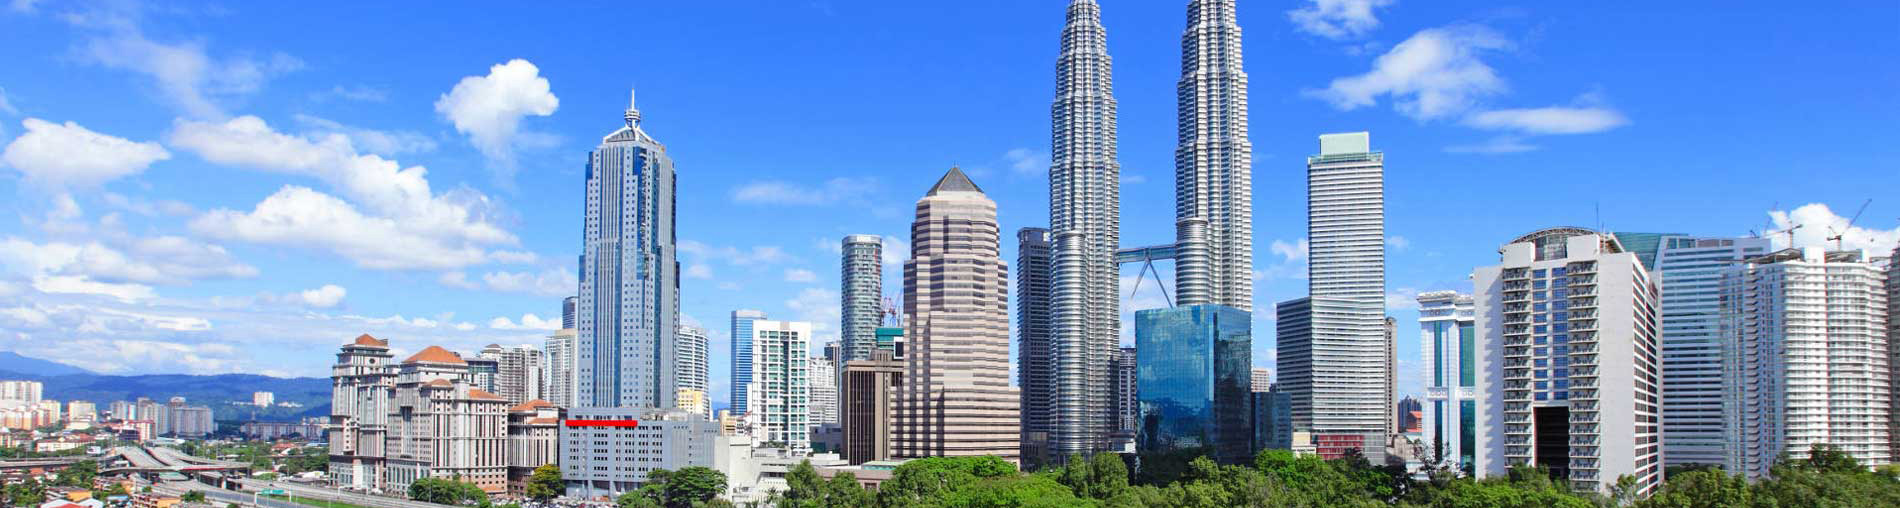 Most Popular Malaysia Tour Packages